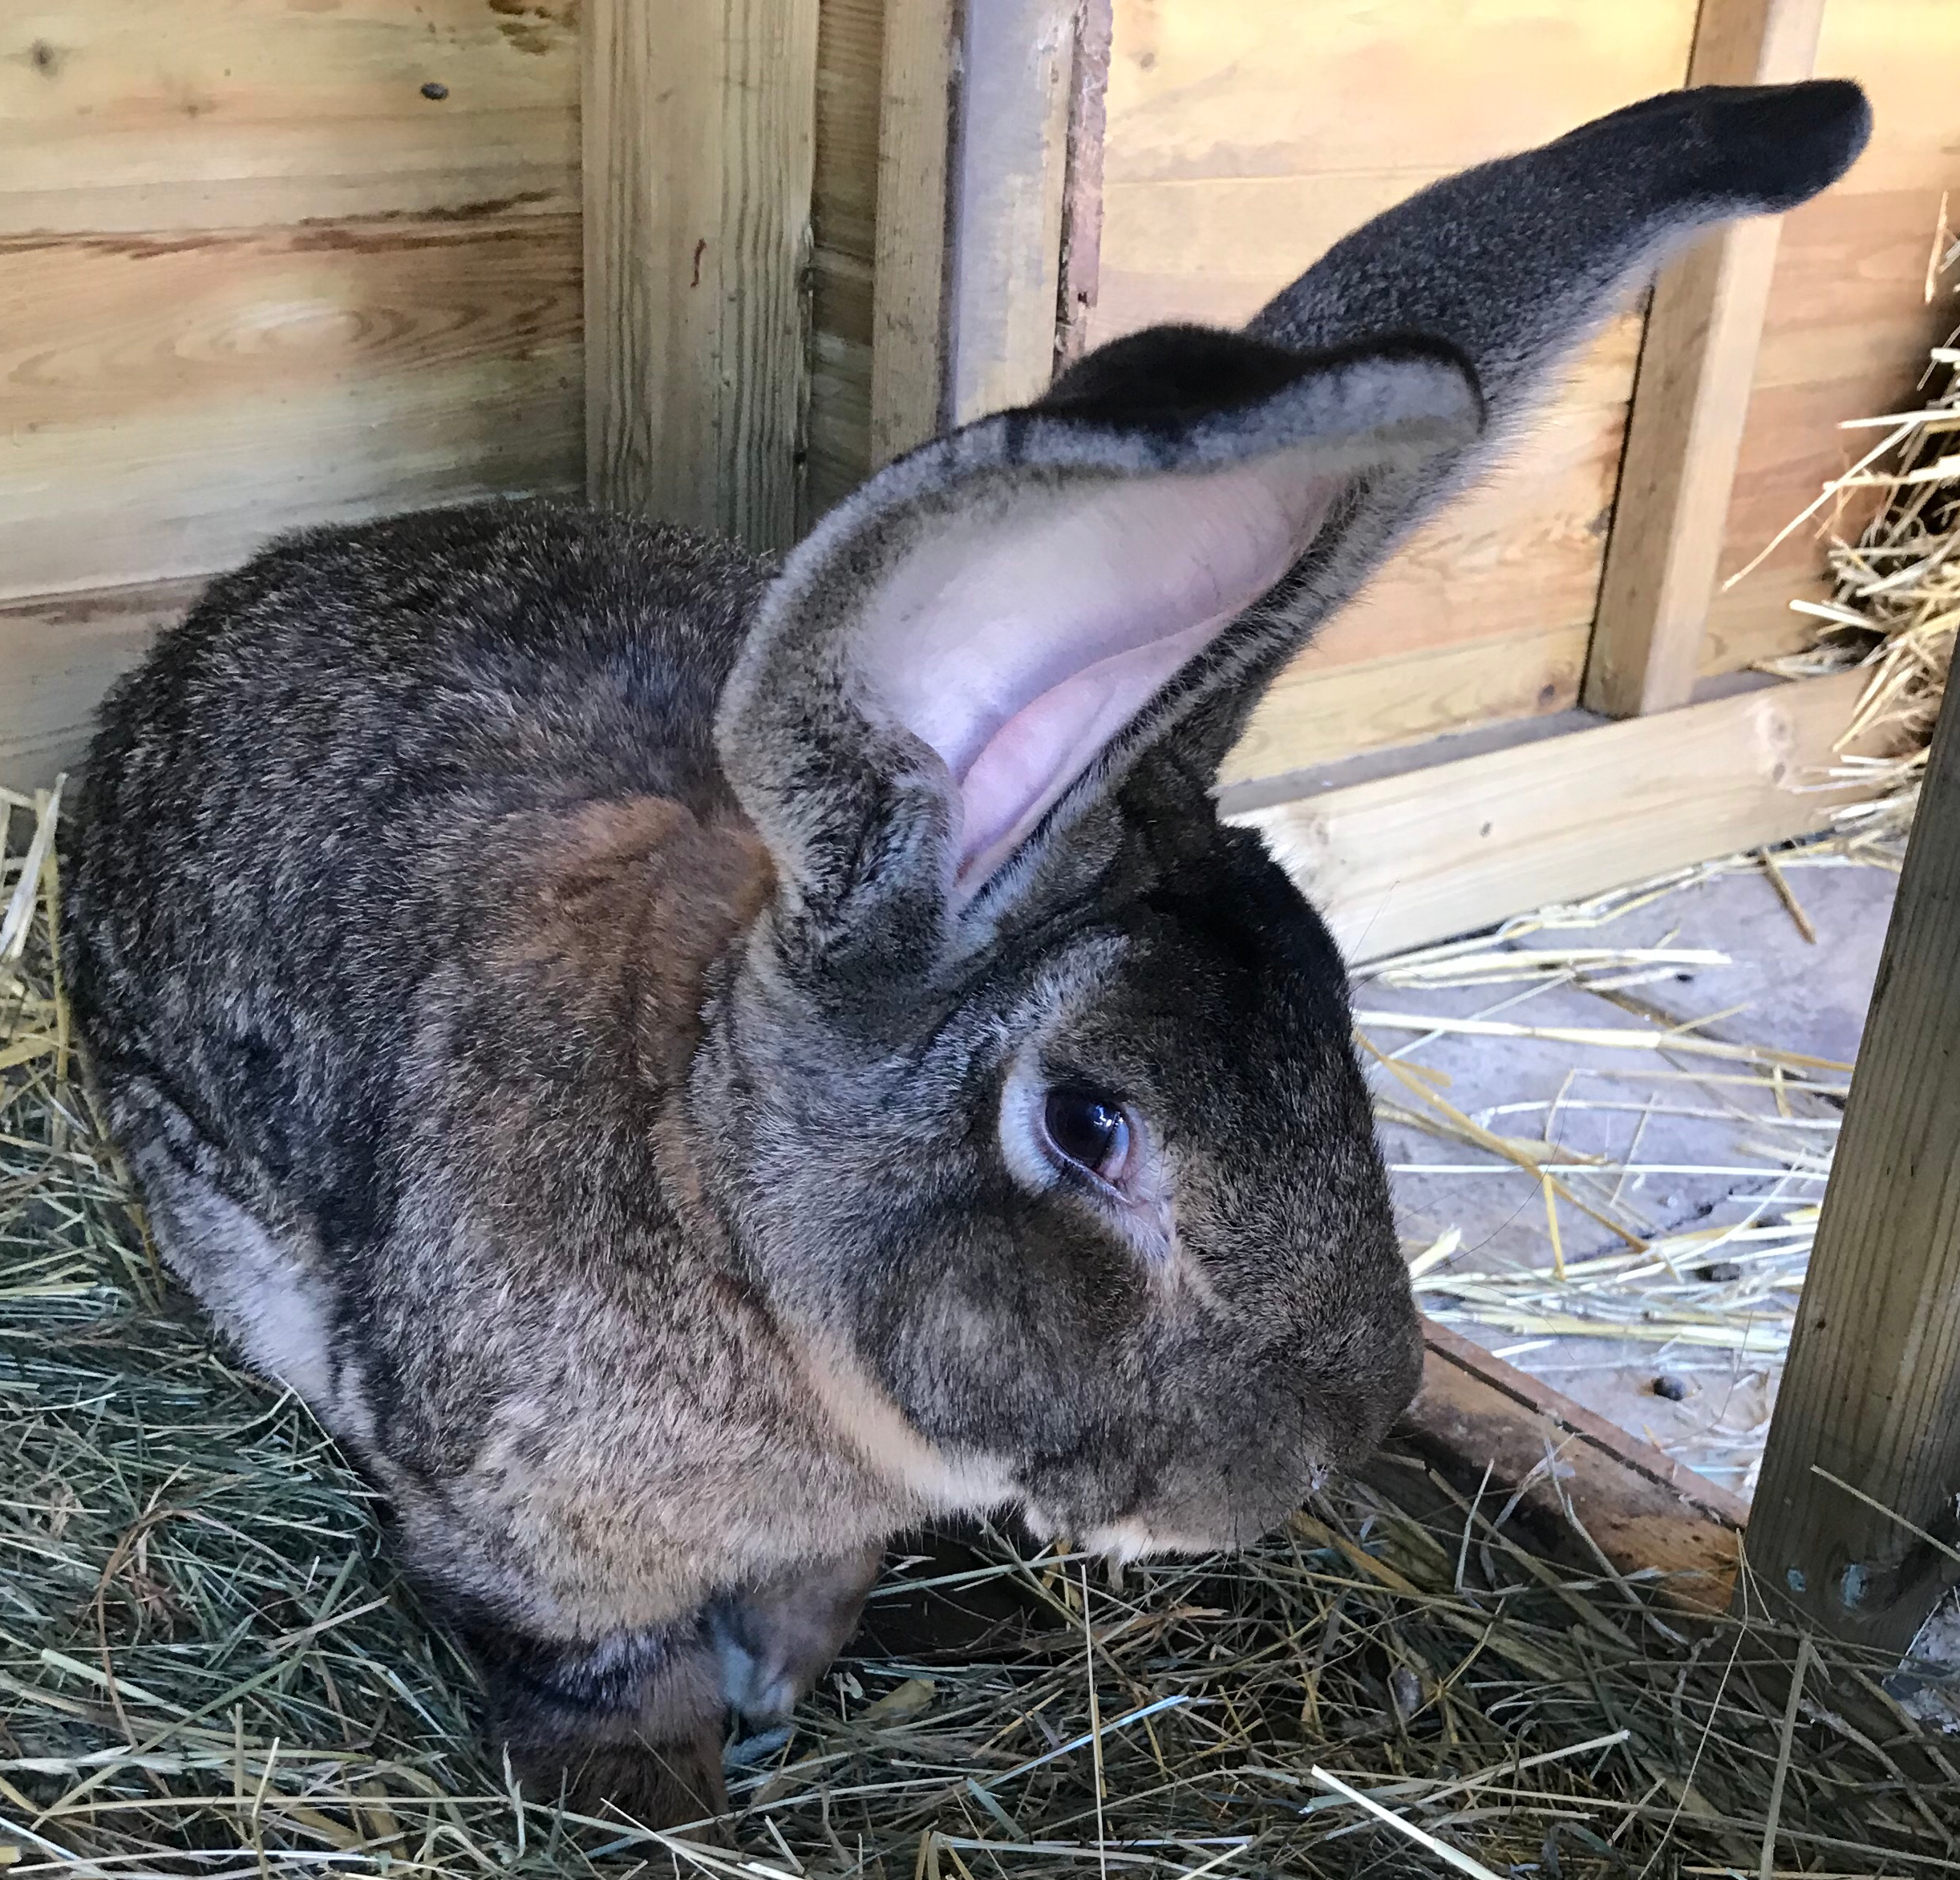 Darius, the world’s biggest rabbit was found missing from his owner’s home in Stoulton, Worcestershire